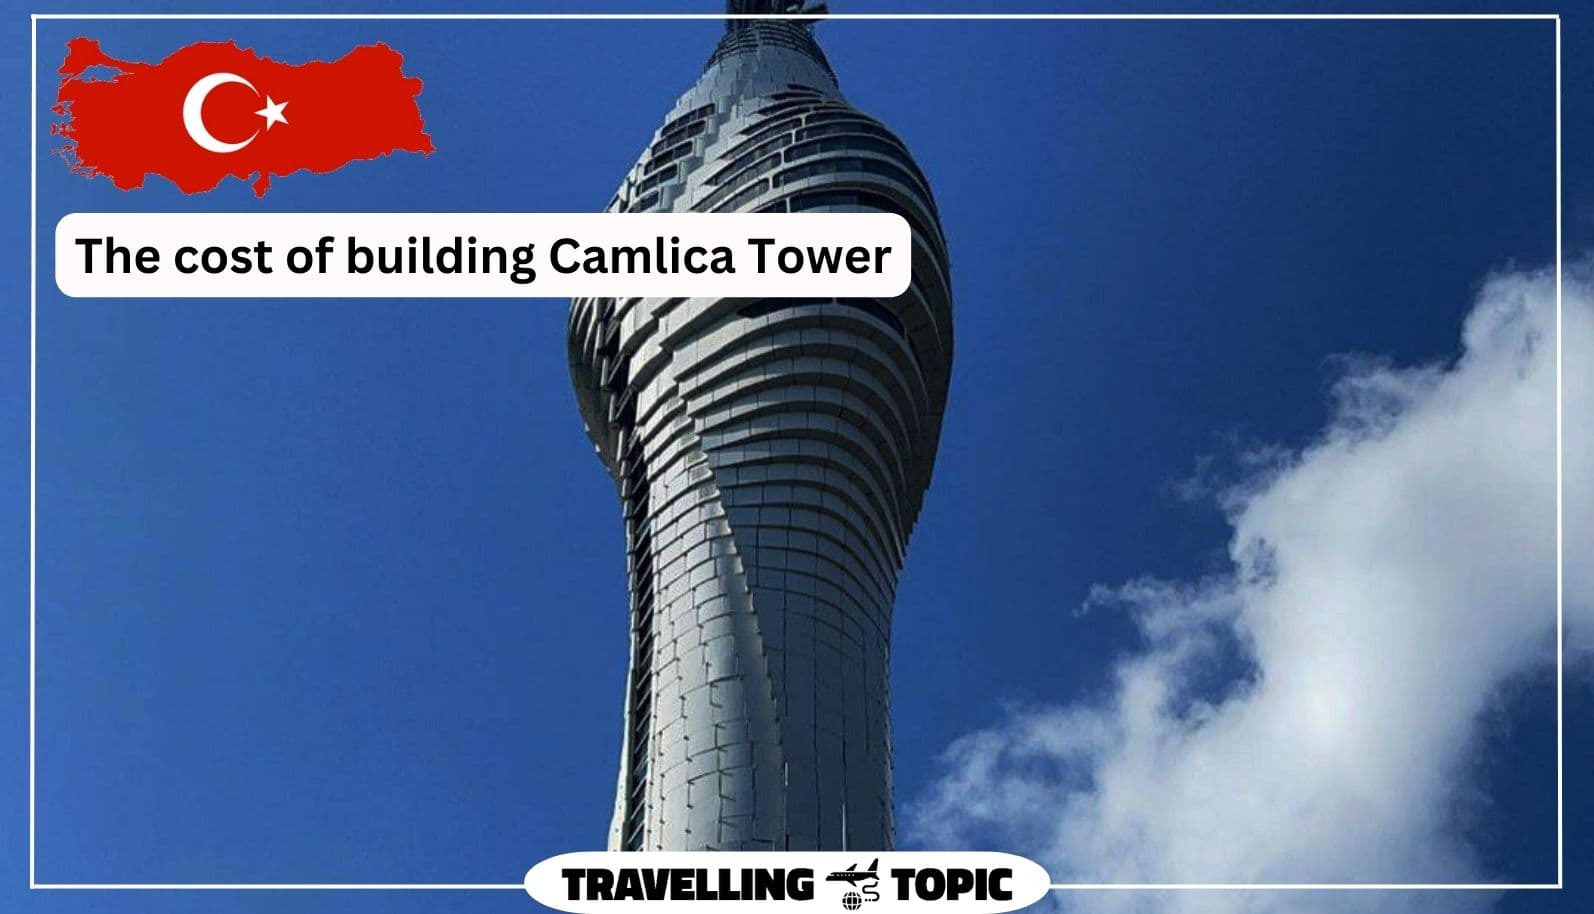 The cost of building Camlica Tower